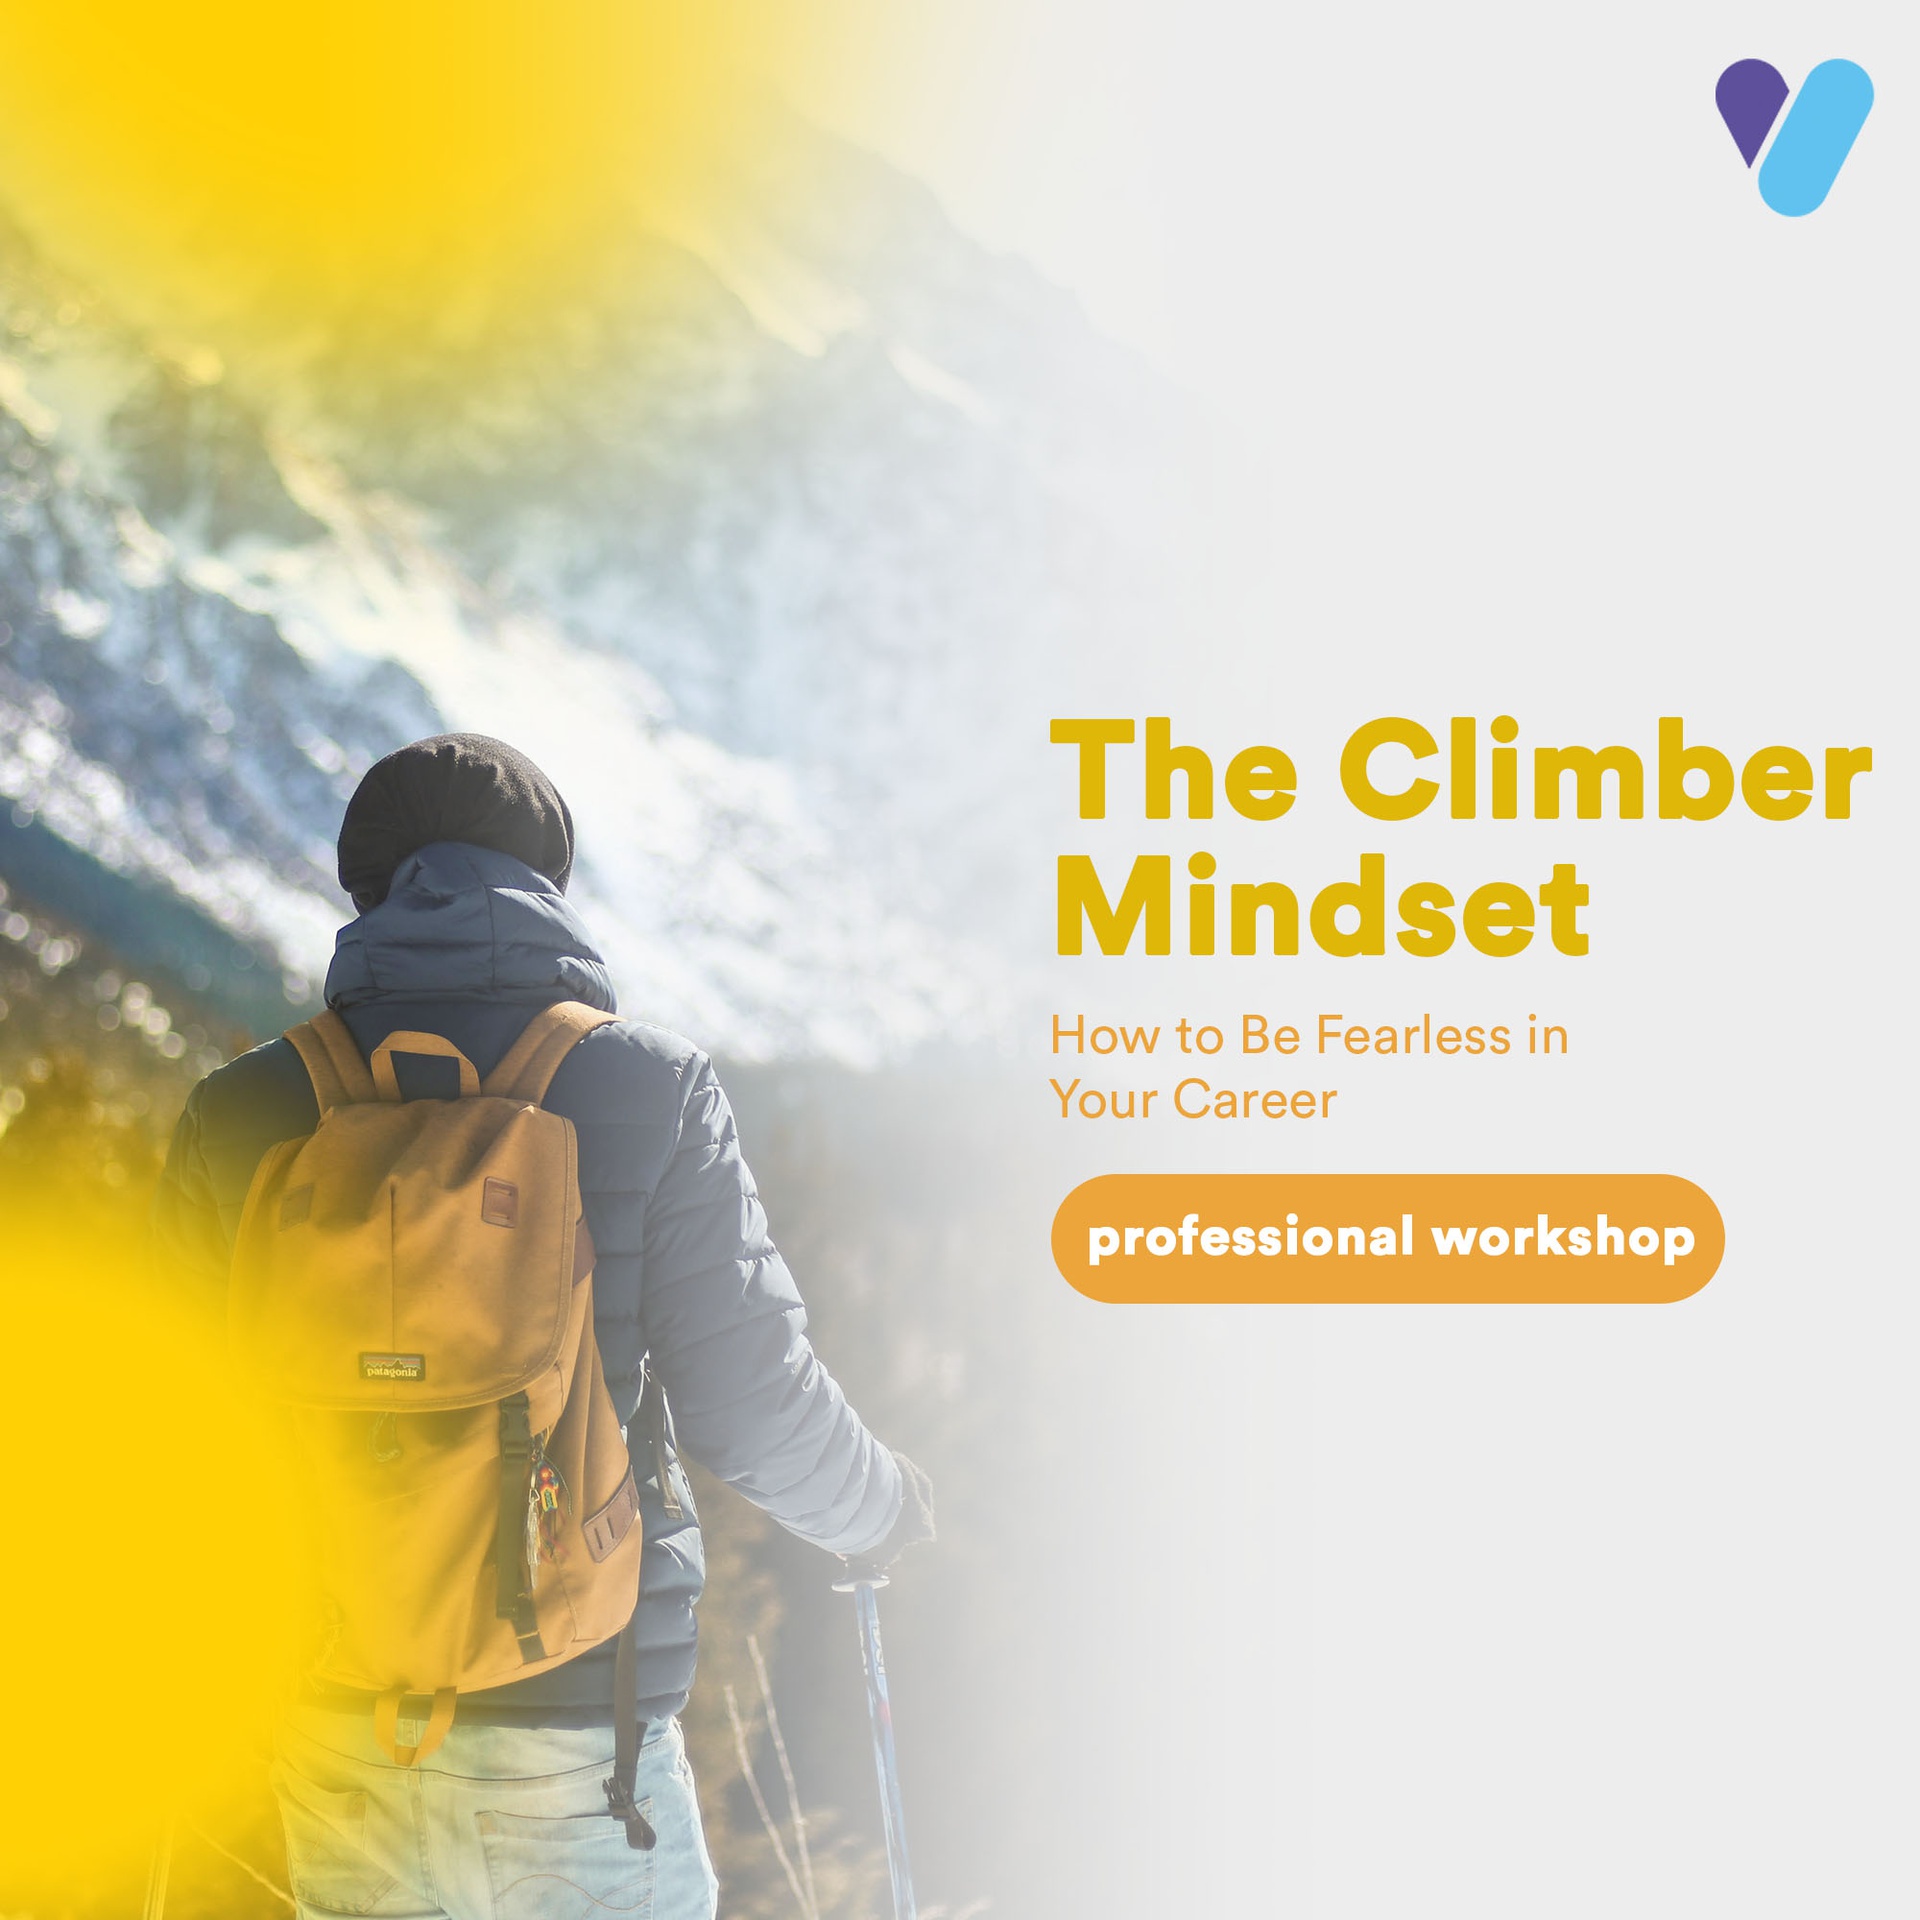 The Climber Mindset: How to be Fearless in Your Career